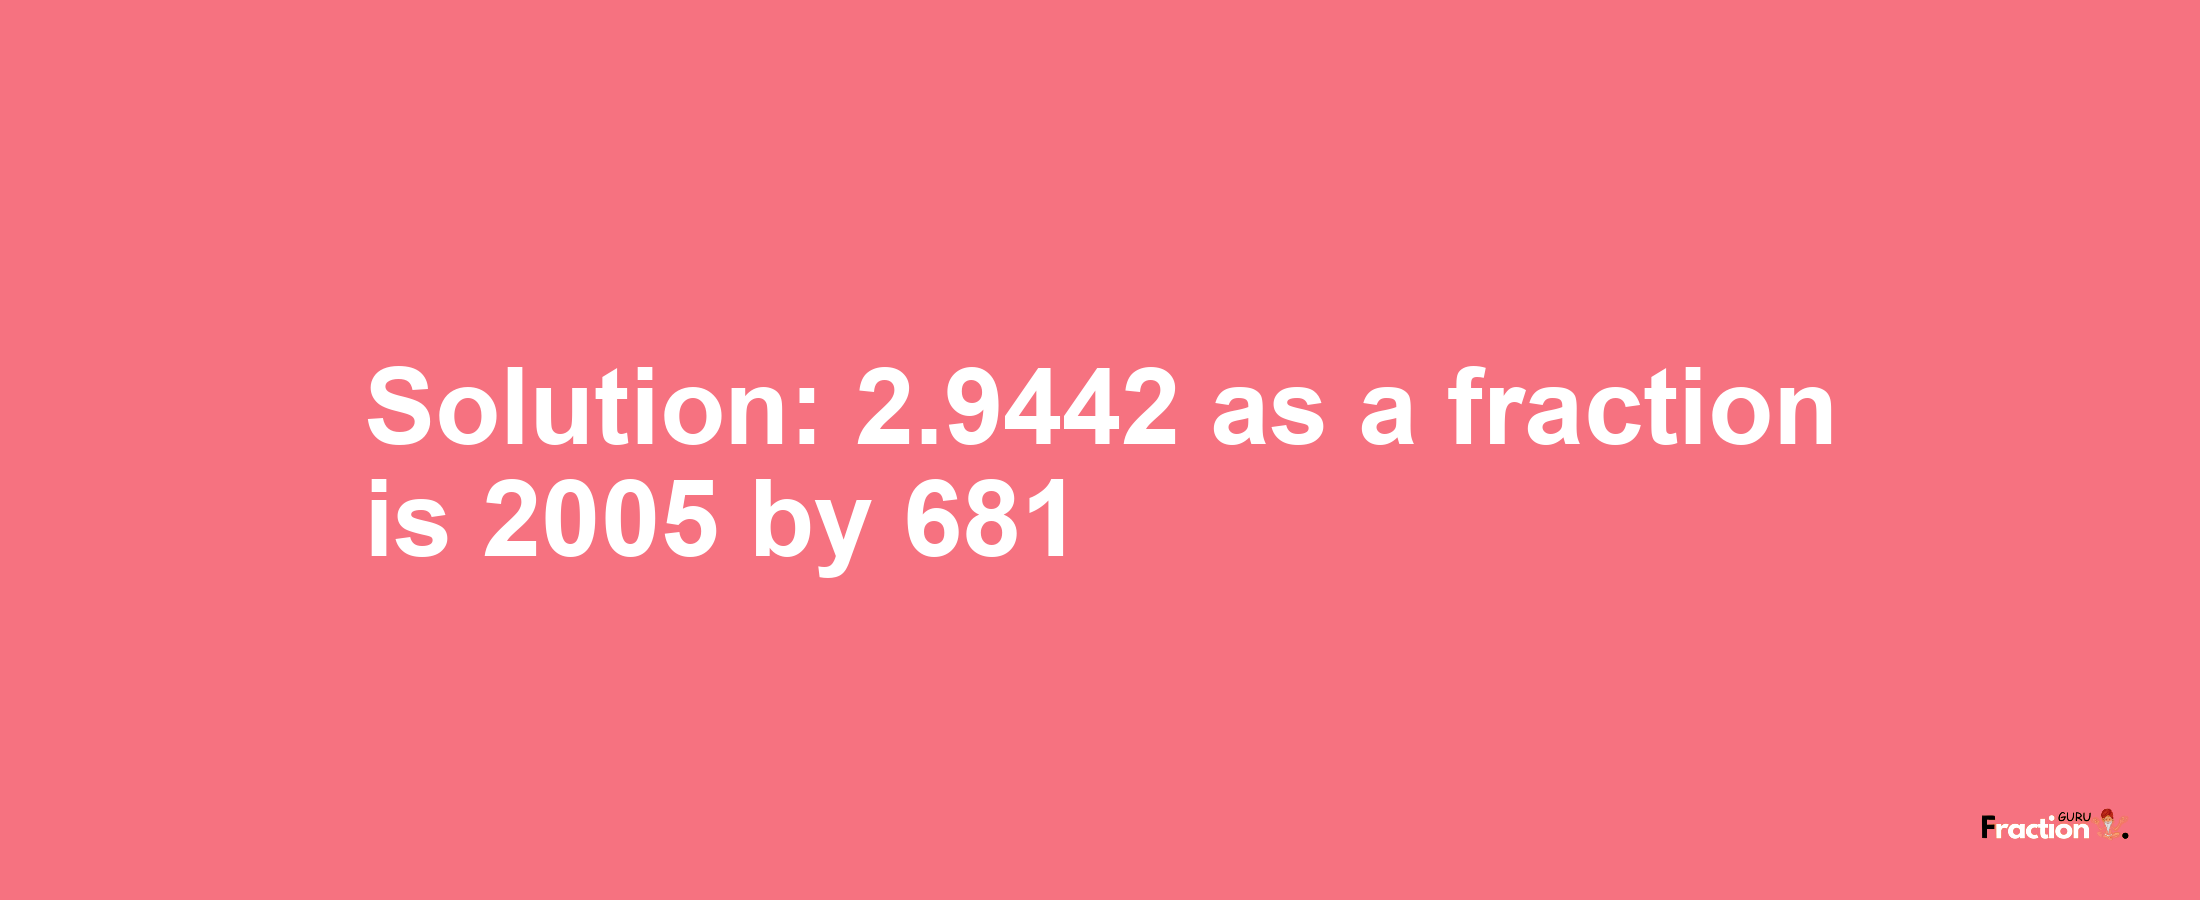 Solution:2.9442 as a fraction is 2005/681